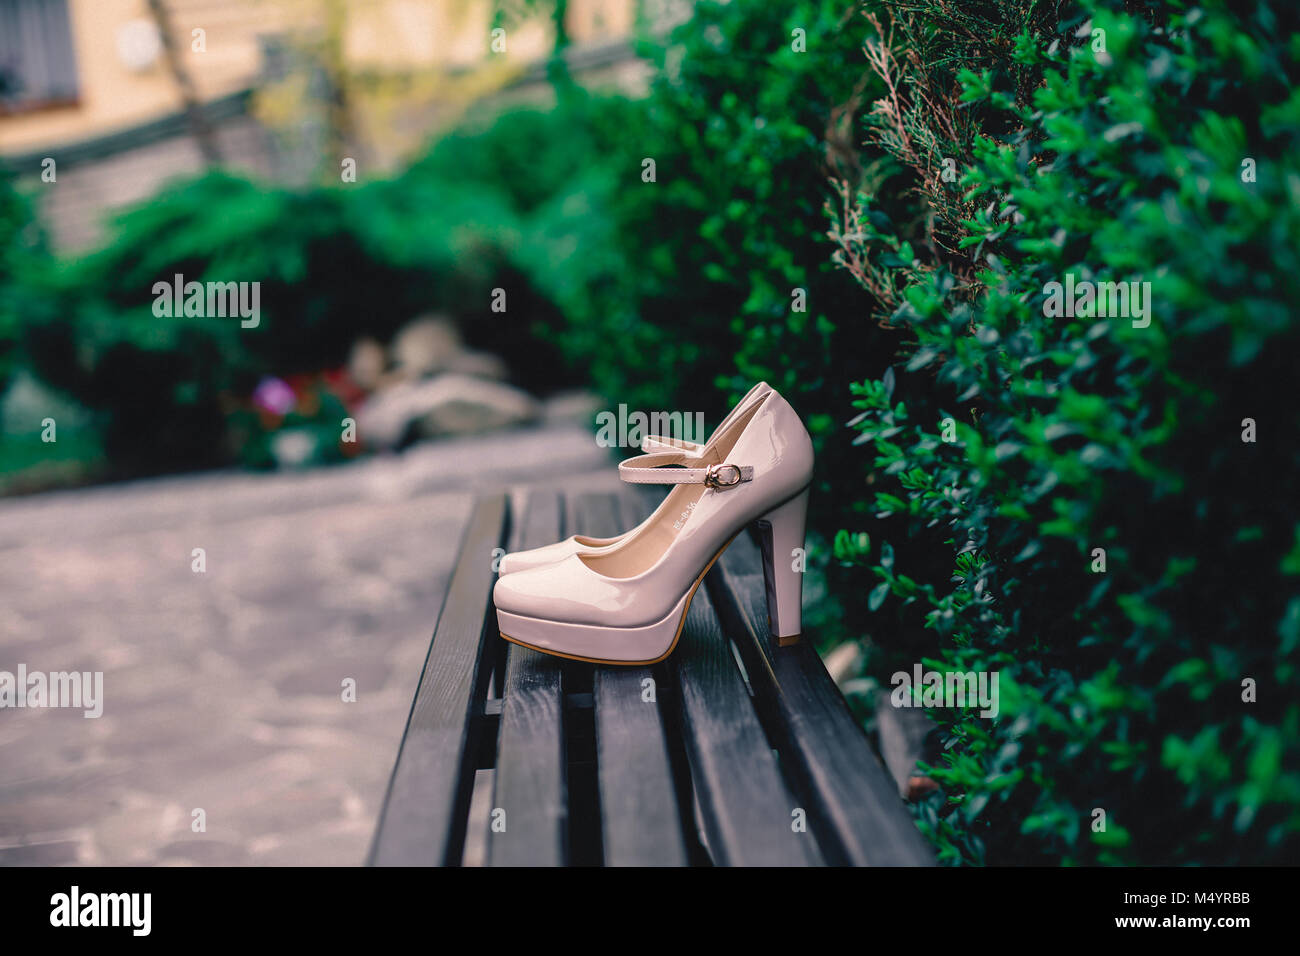 Bride shoes standing on the street Stock Photo